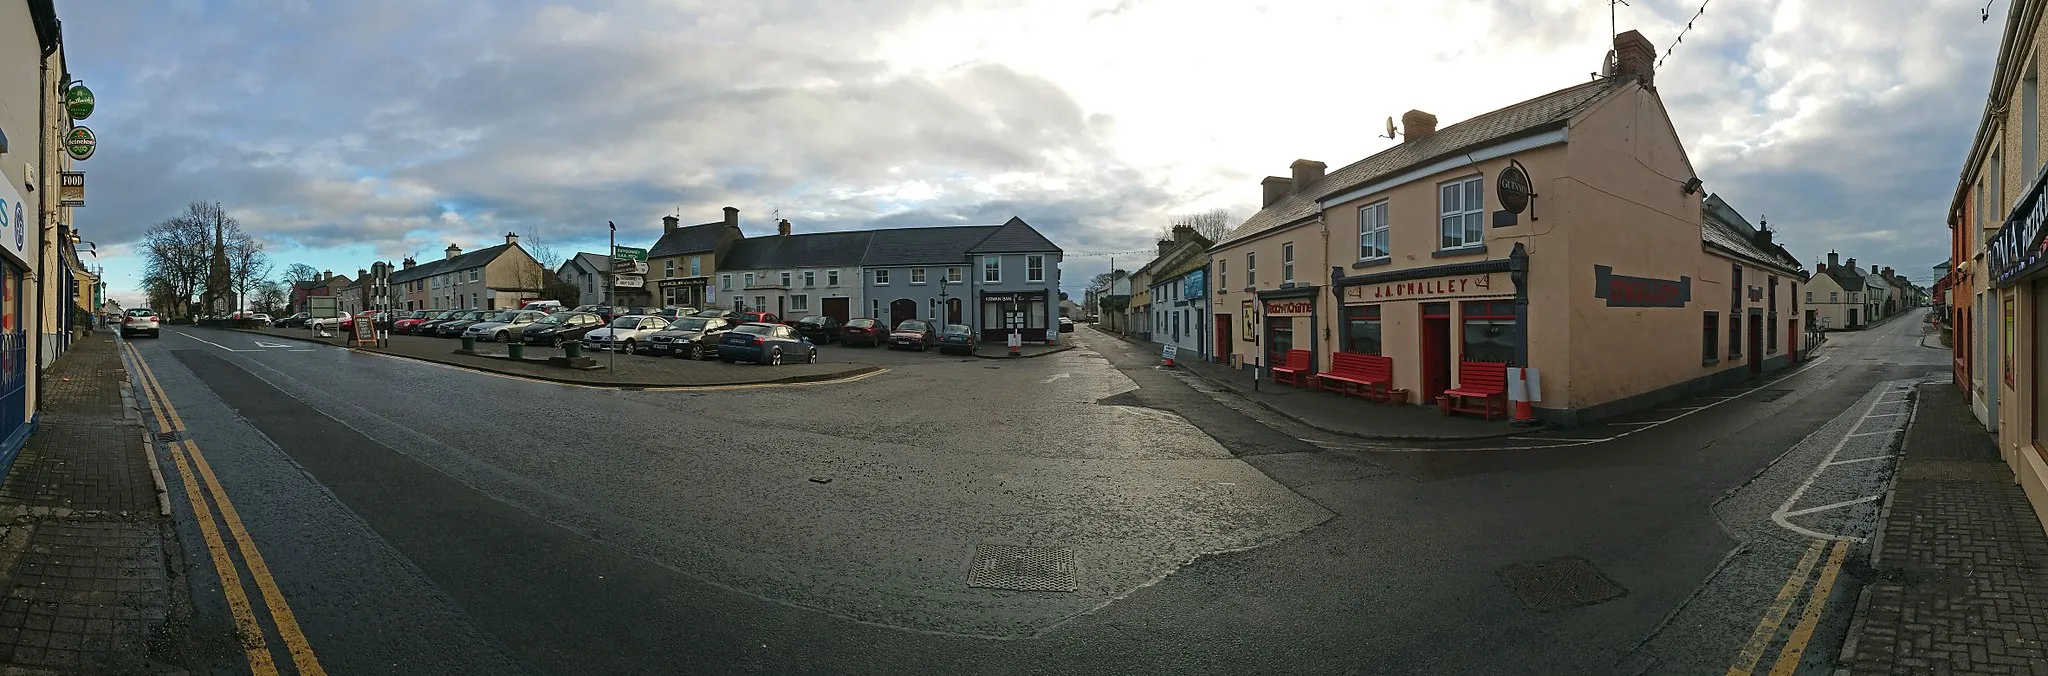 Photo showing: Panorama of Rathdowney, Co. Laois, Ireland.  Church Street on left, Ossory Street centre, Main Street on right.